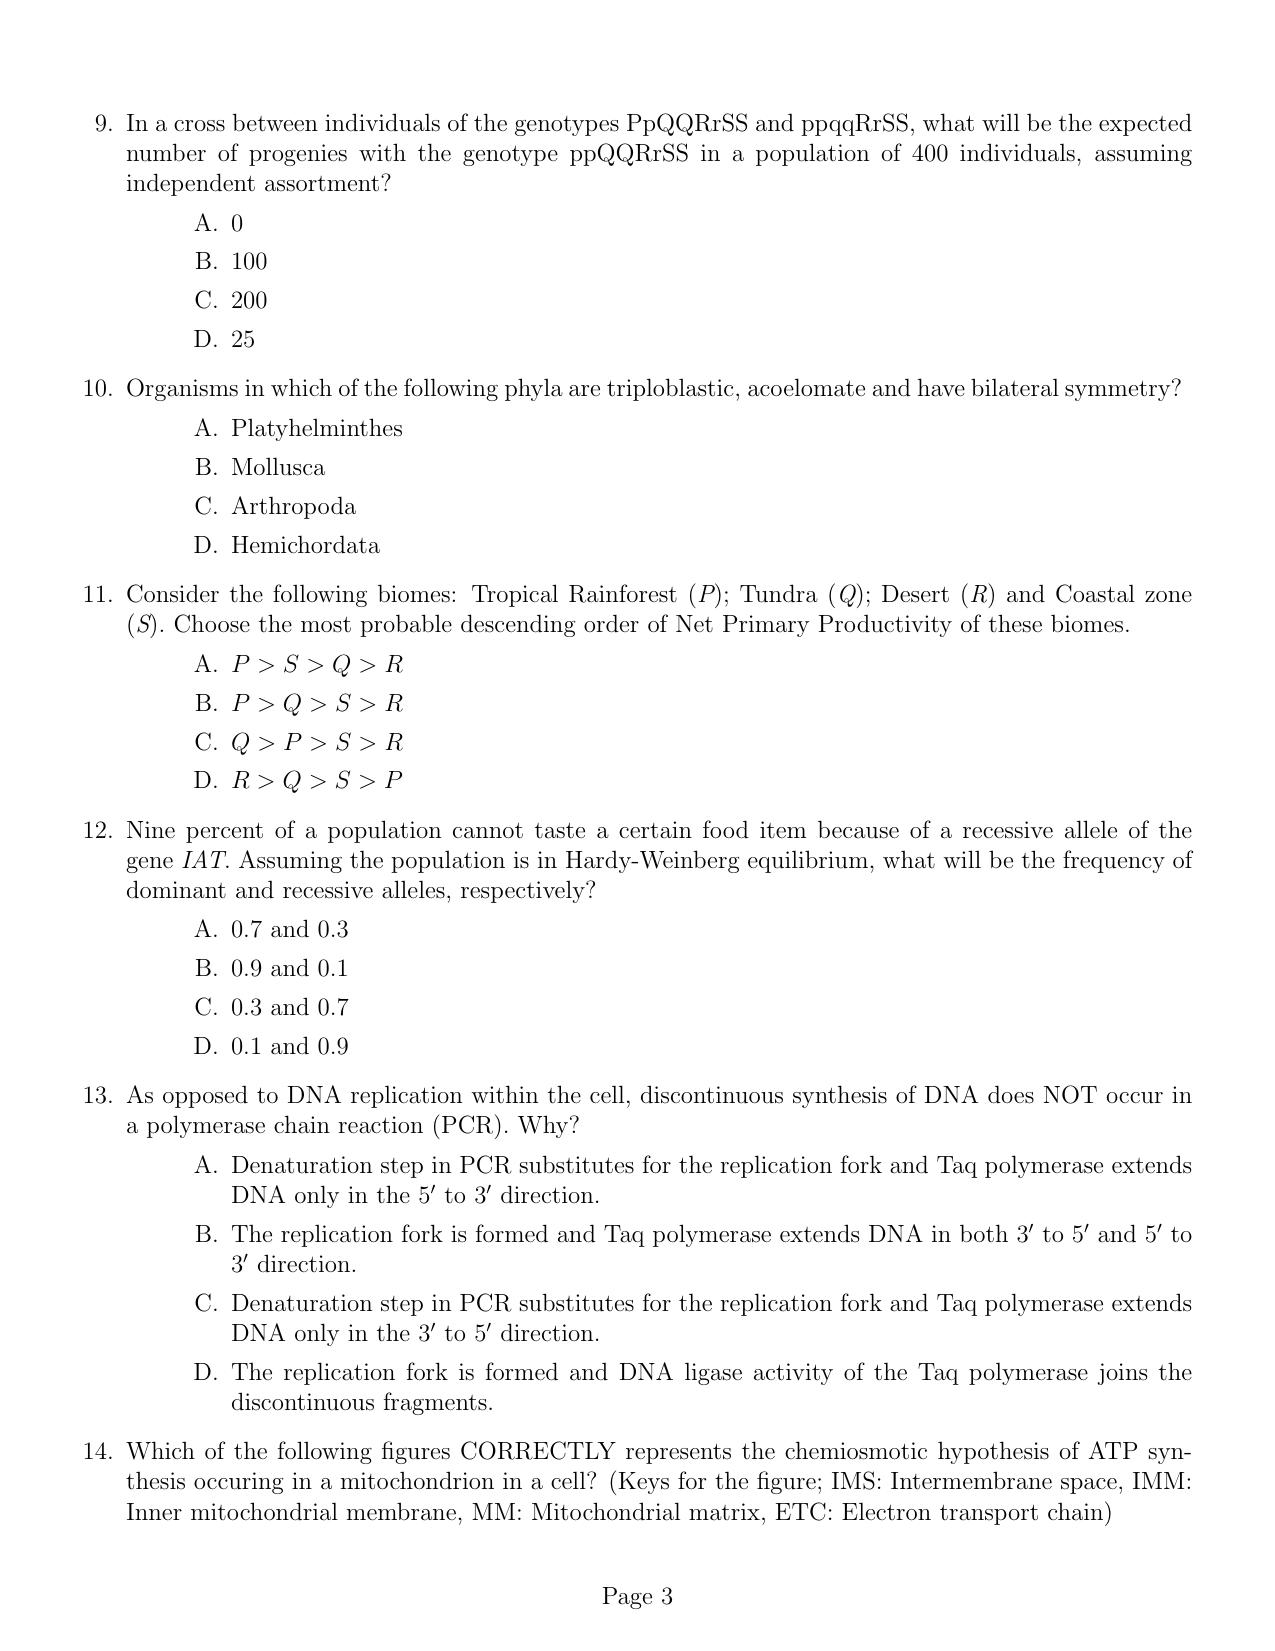 IISER Aptitude Test 2022 English Question Paper - Page 3